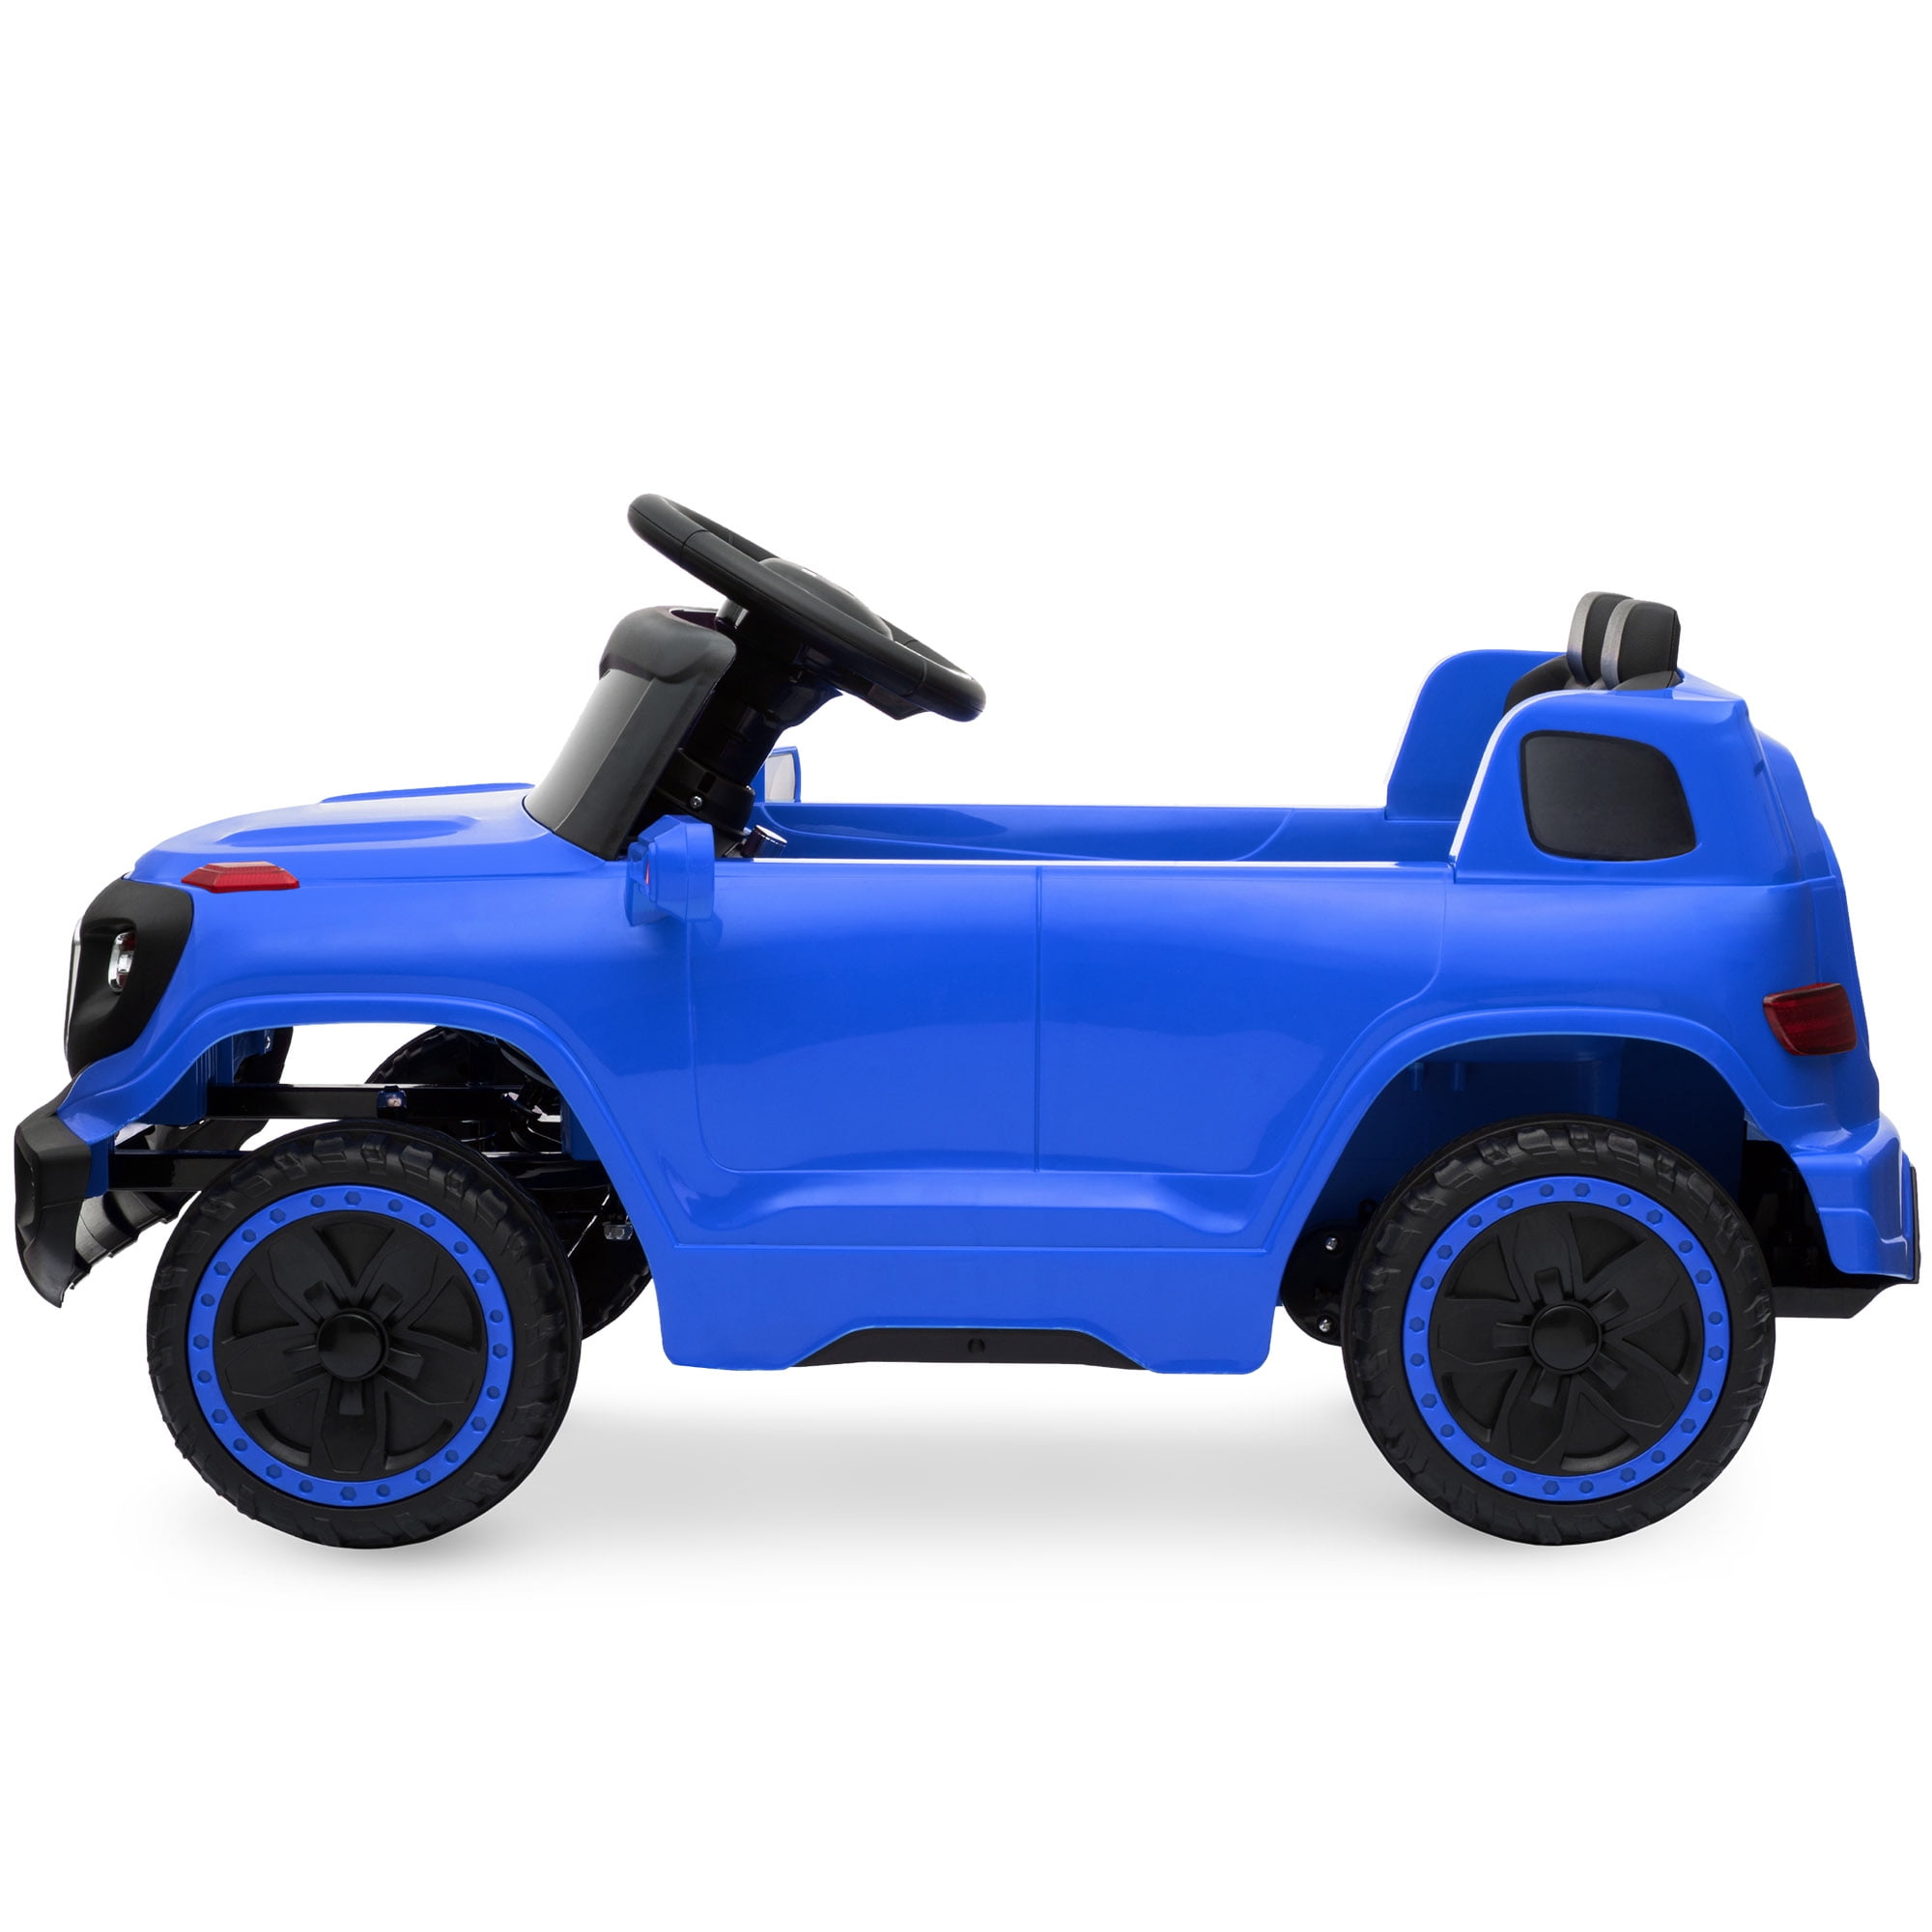 3 Speeds Details about   Best Choice Products 6V Kids Ride On Car Truck w/ Parent Control 